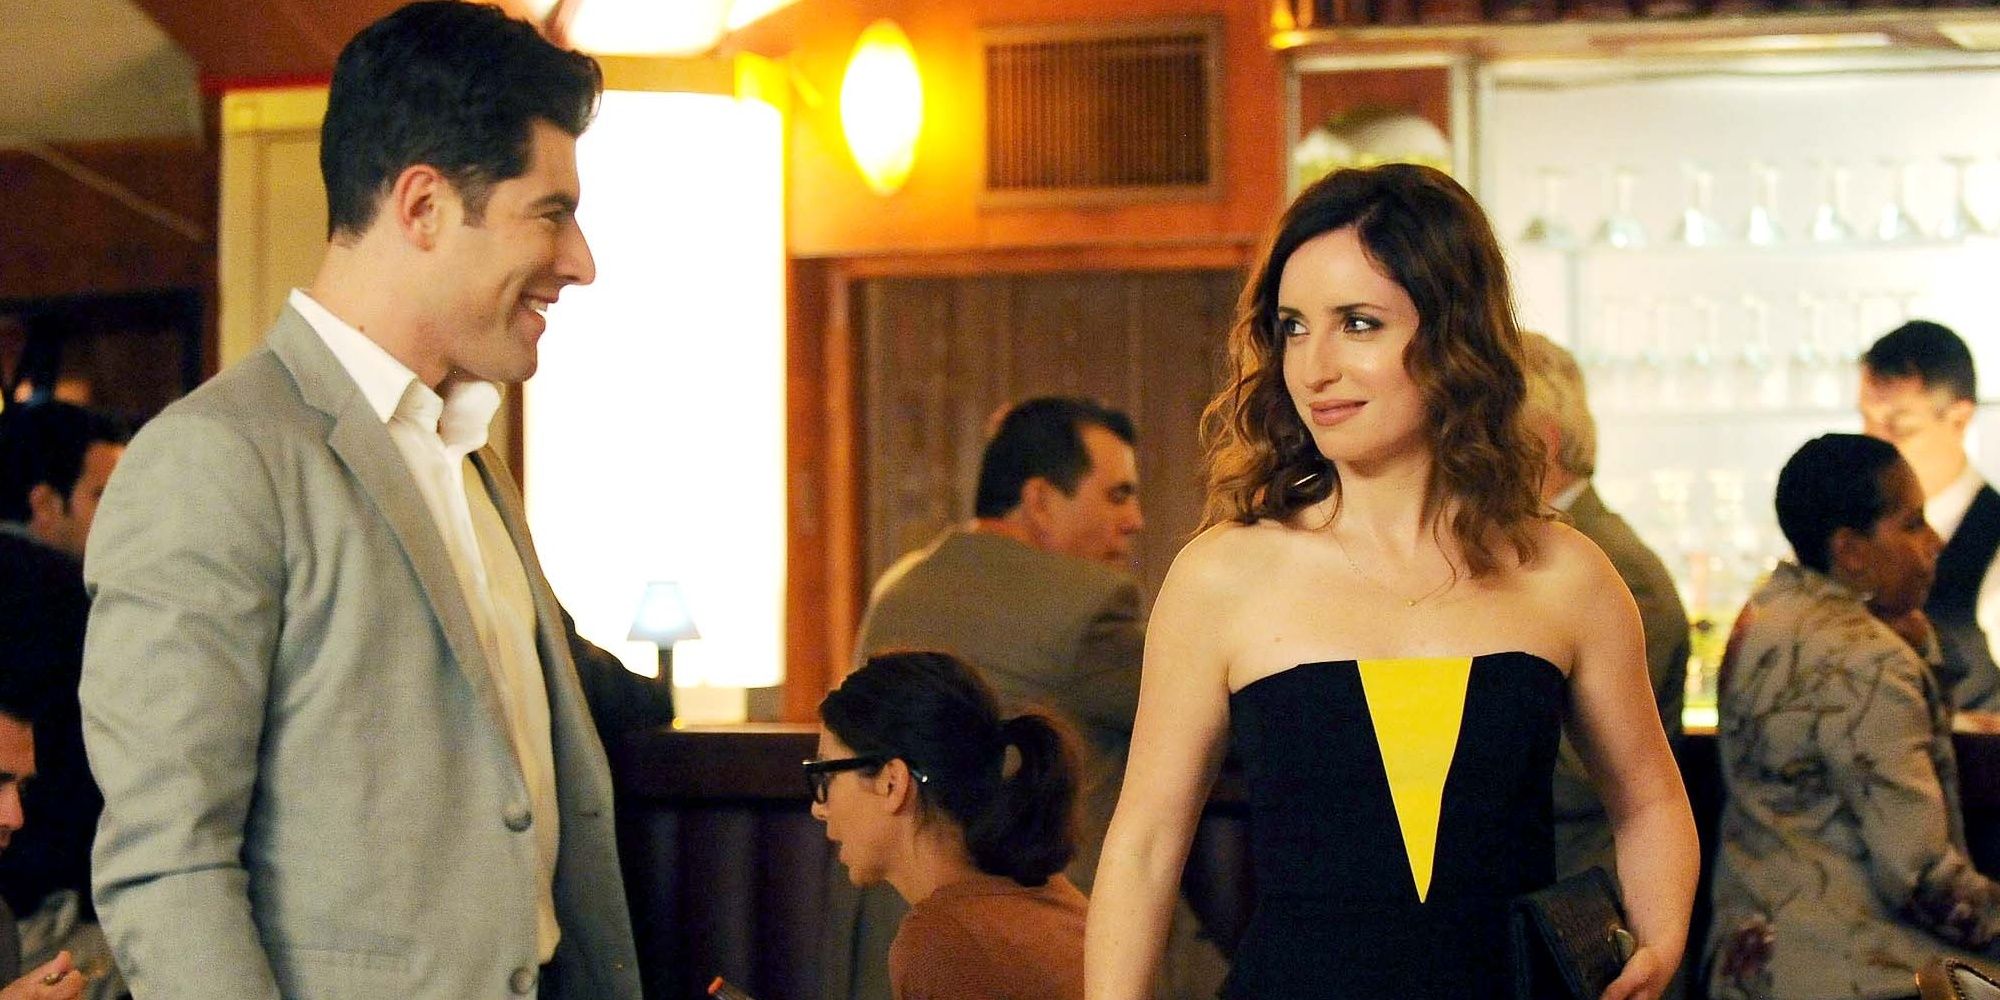 Schmidt and Fawn as a couple